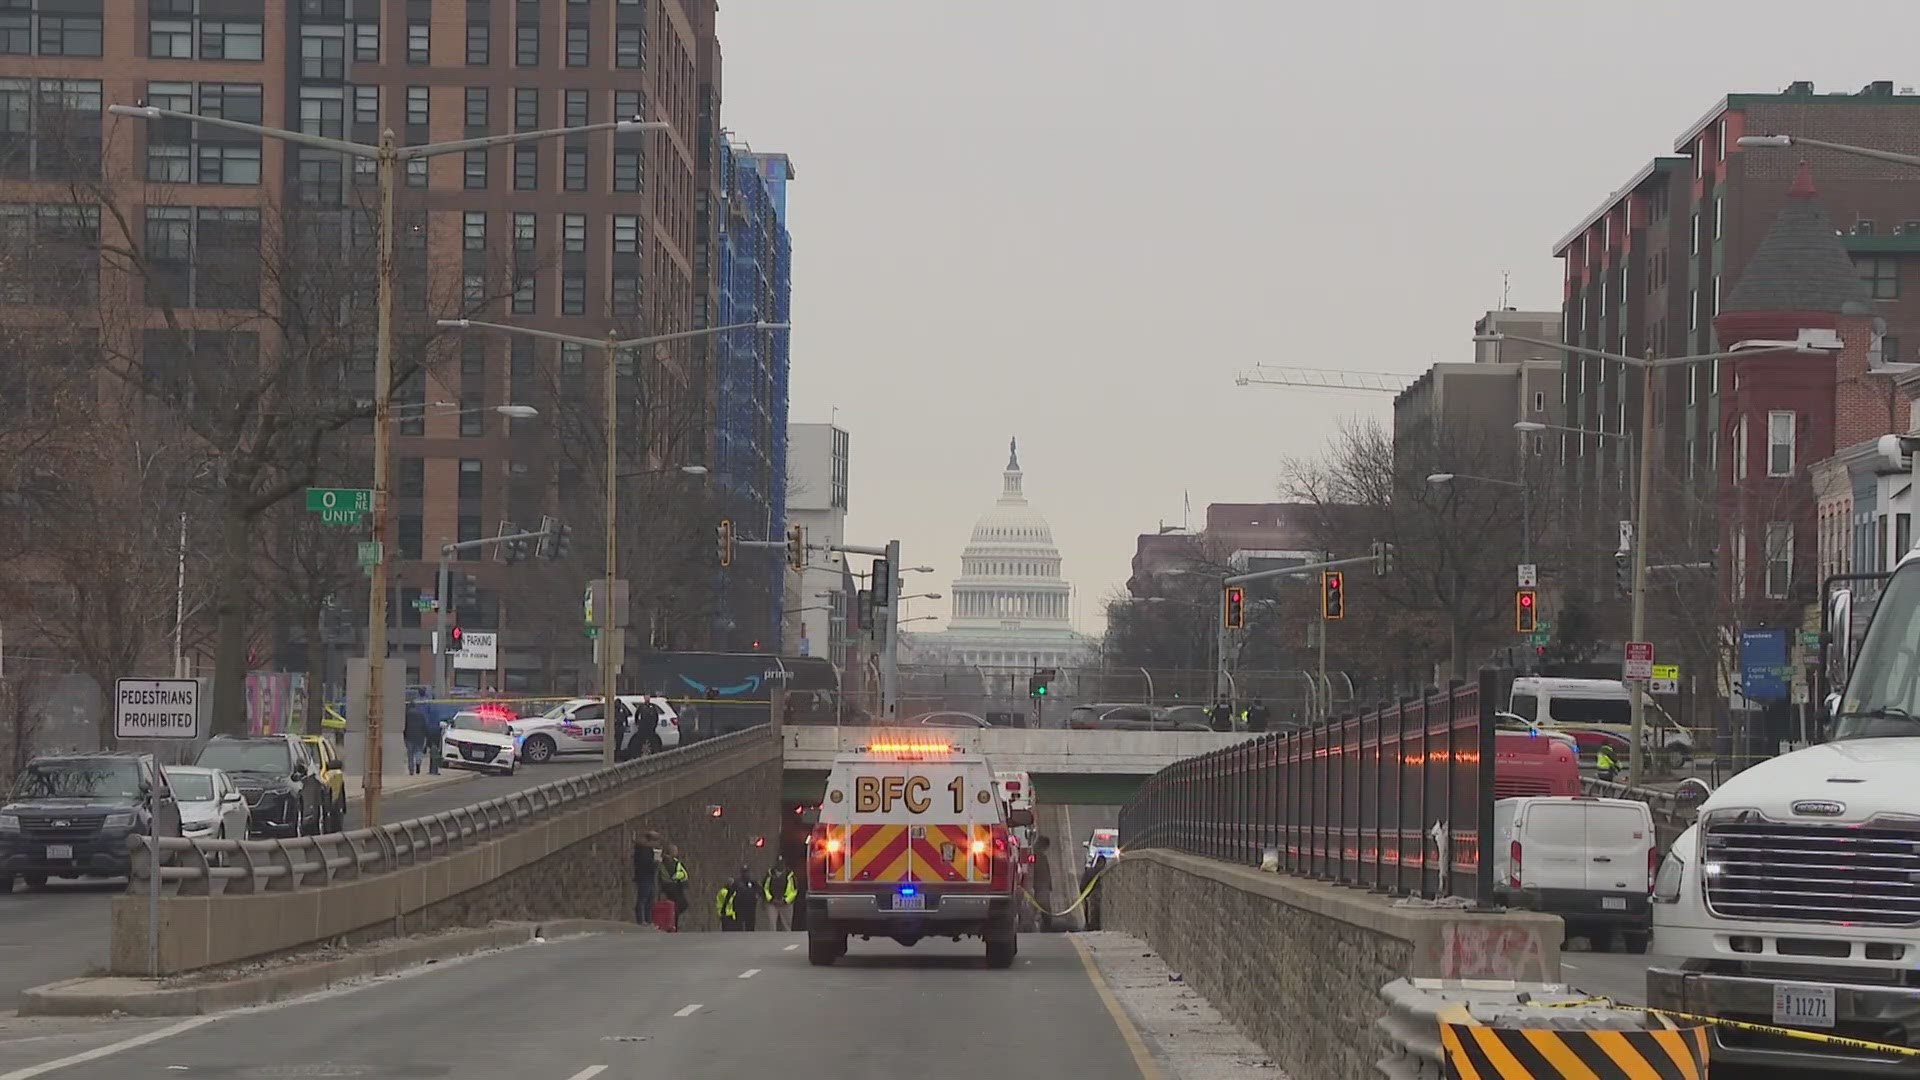 A man is dead and a police officer is on administrative leave following a shooting in D.C.'s NoMa neighborhood Wednesday.